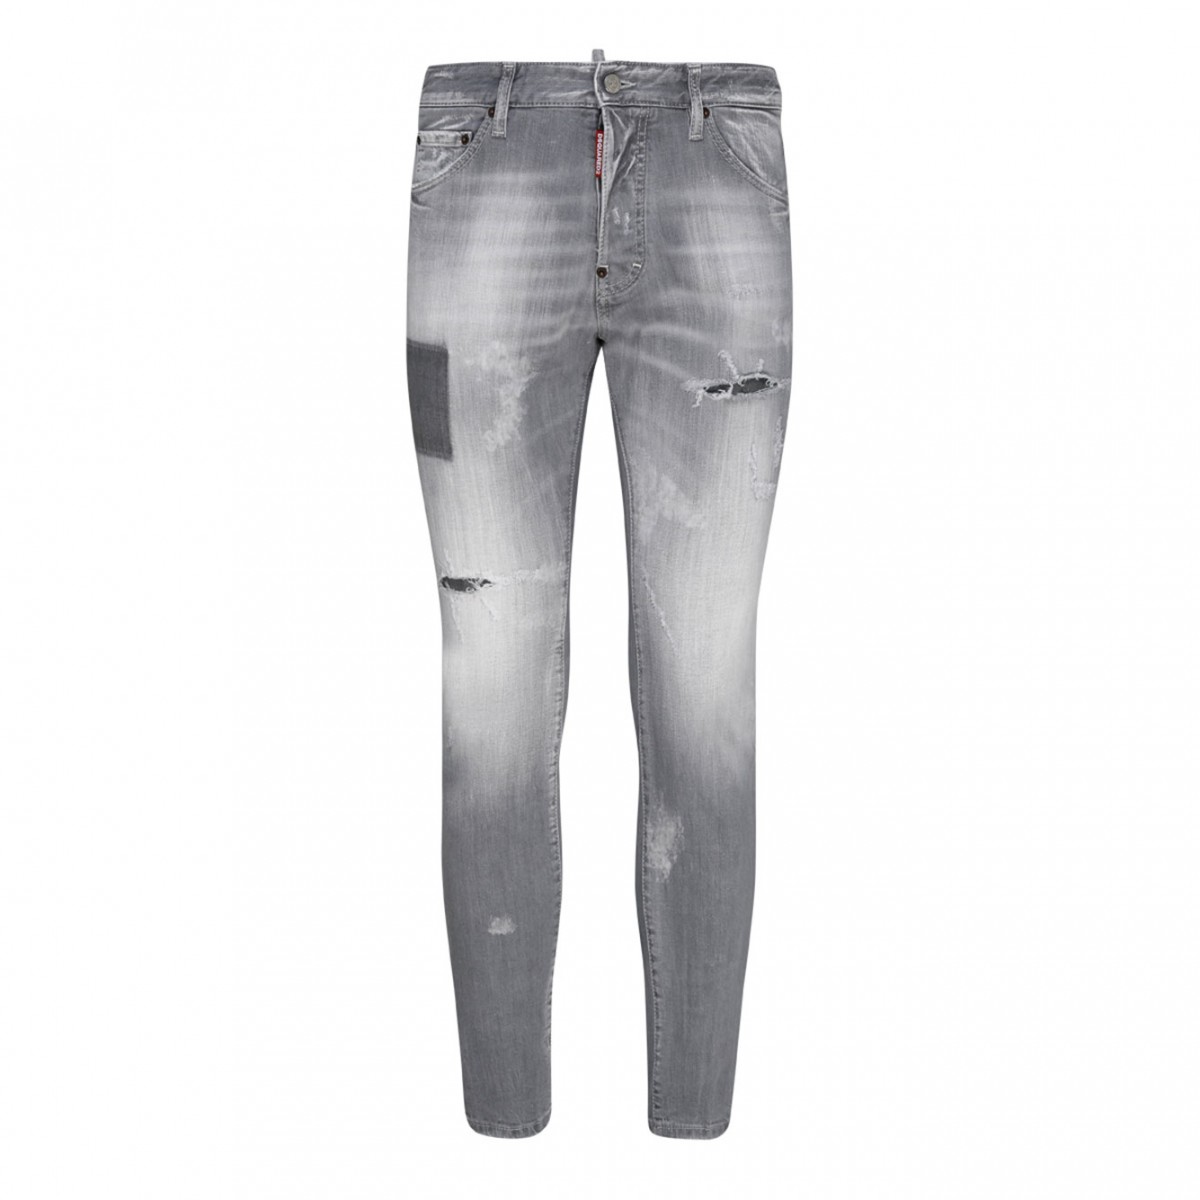 Grey Cotton Distressed Jeans